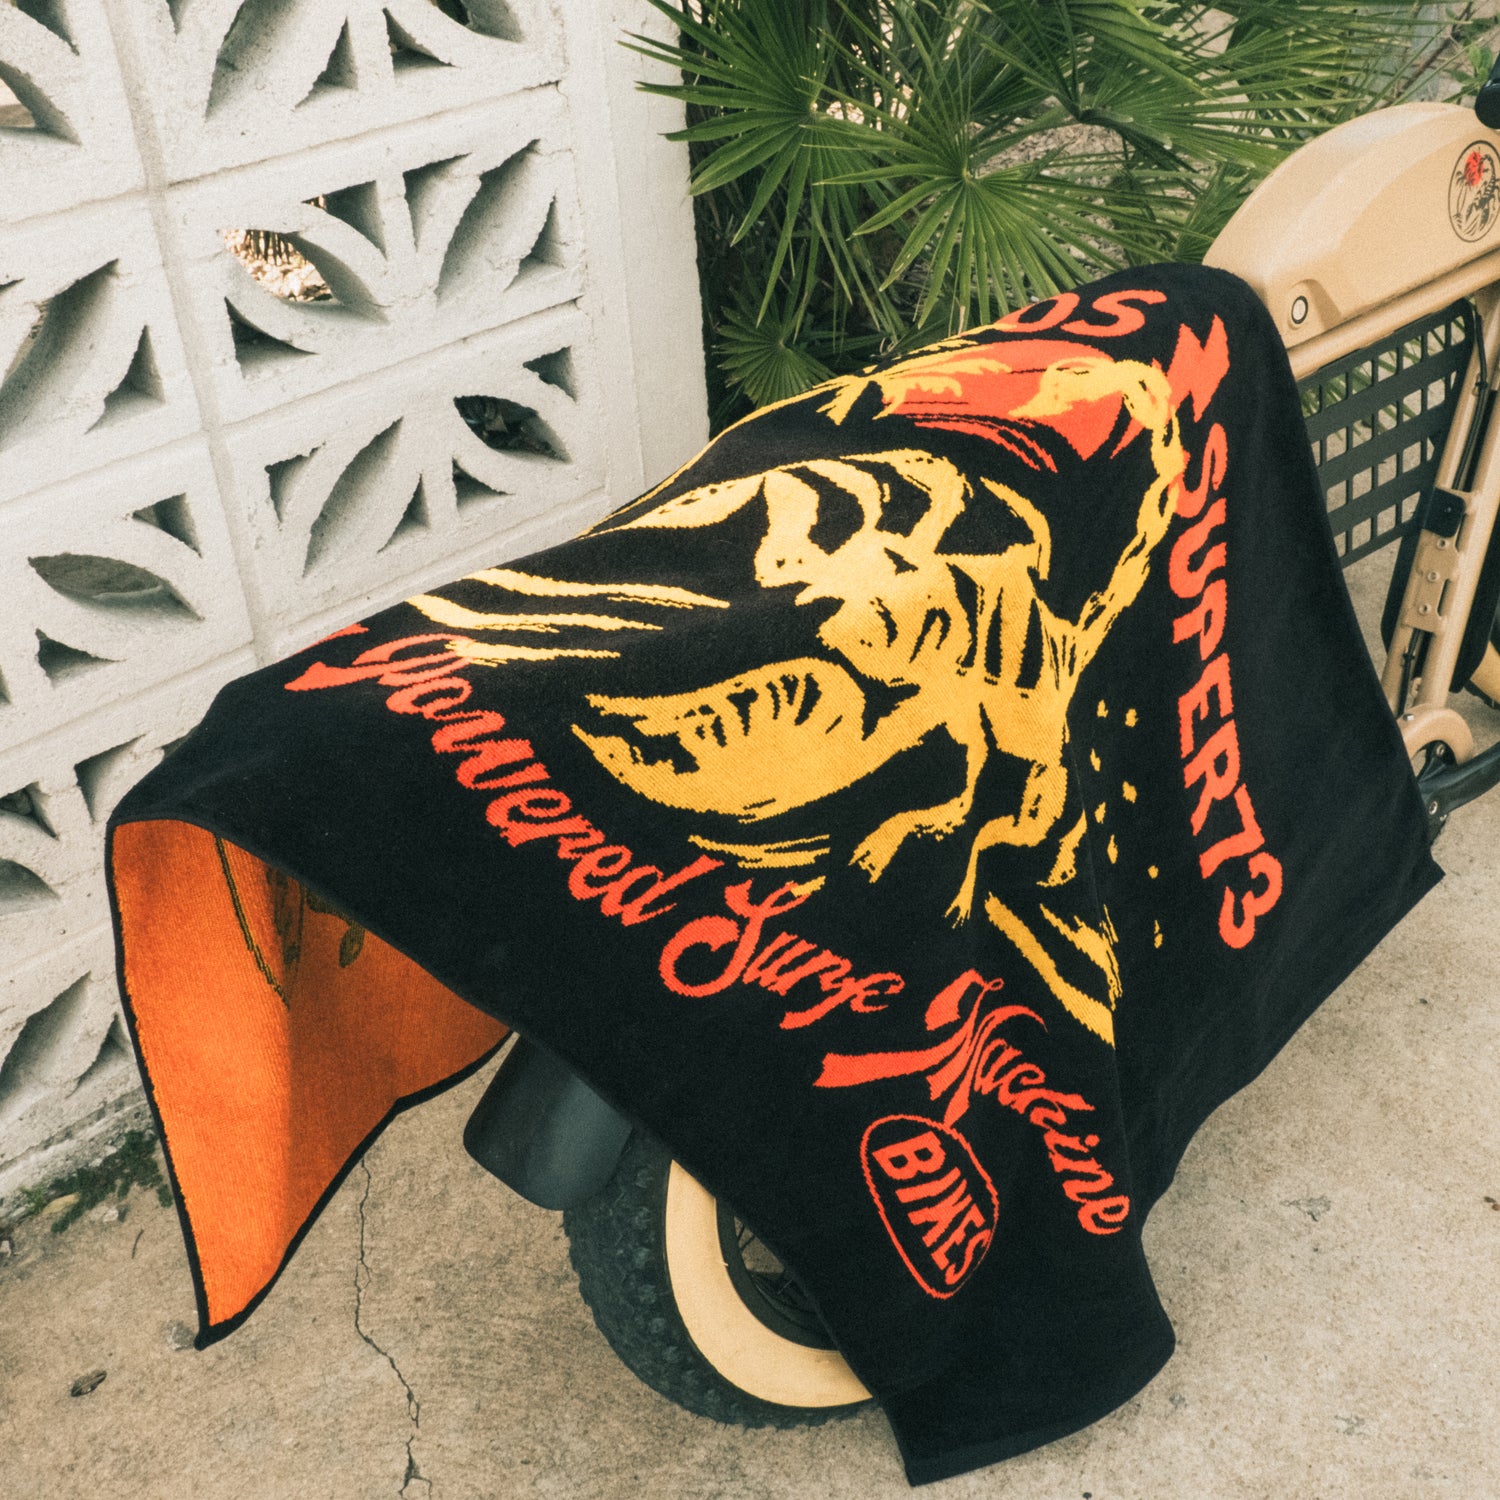 Howler Brothers x Super73 Beach Towel